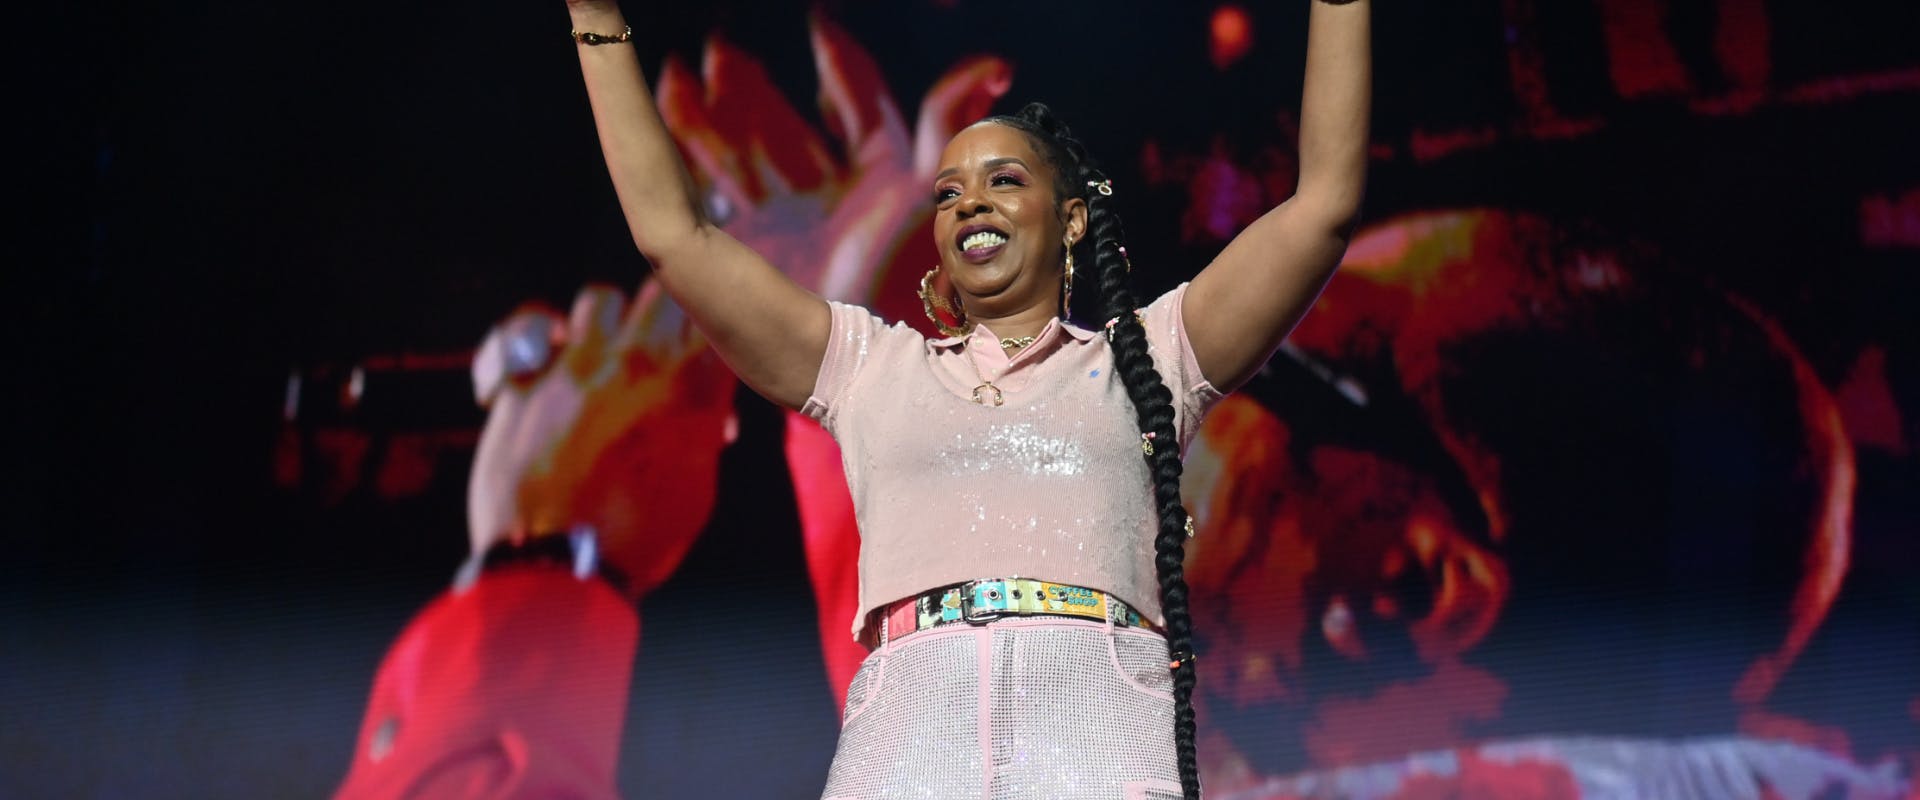 ATLANTA, GEORGIA - MAY 12: Rah Digga Onstage during 2023 Strength Of A Woman Festival & Summit - Mary J. Blige Concert at State Farm Arena on May 12, 2023 in Atlanta, Georgia. (Photo by Prince Williams/WireImage)